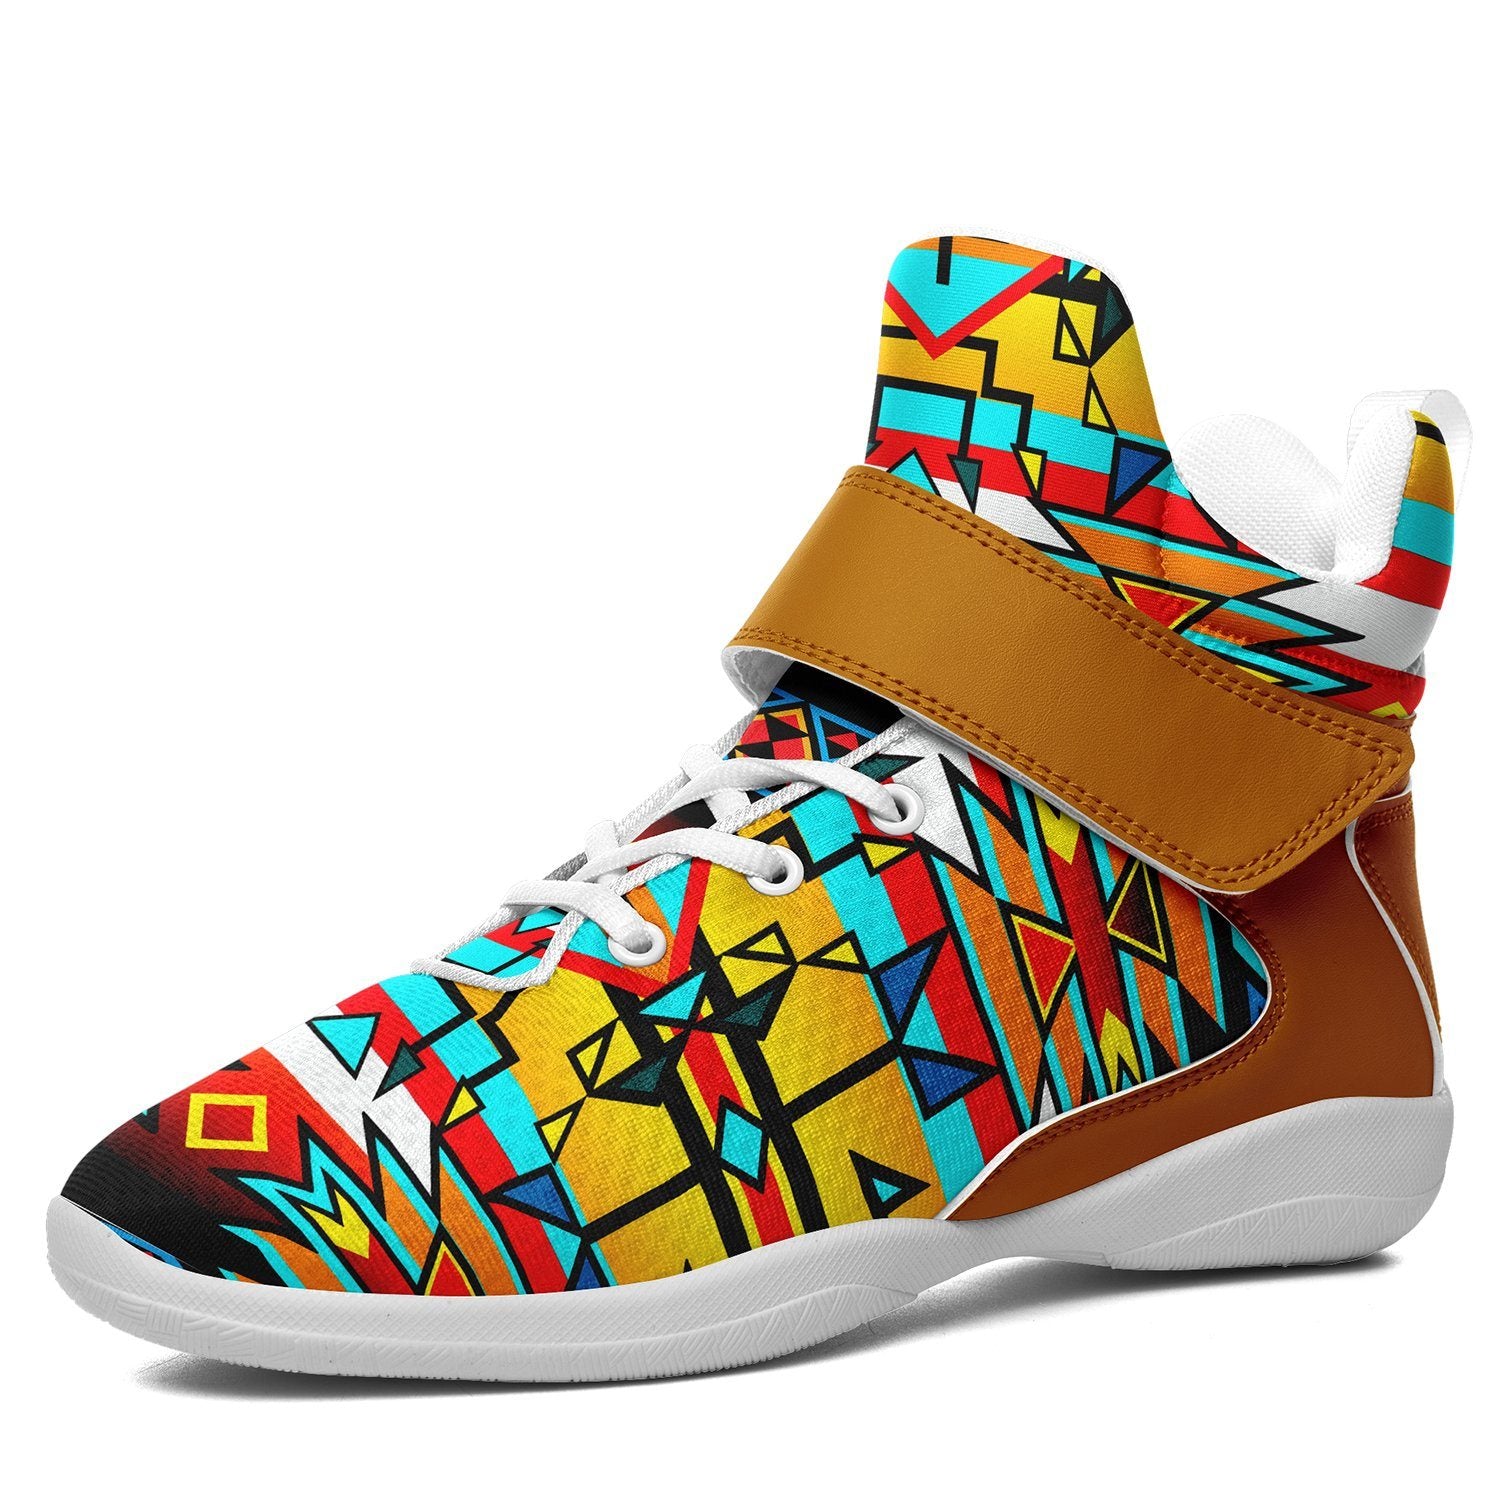 Force of Nature Twister Ipottaa Basketball / Sport High Top Shoes 49 Dzine US Women 4.5 / US Youth 3.5 / EUR 35 White Sole with Brown Strap 